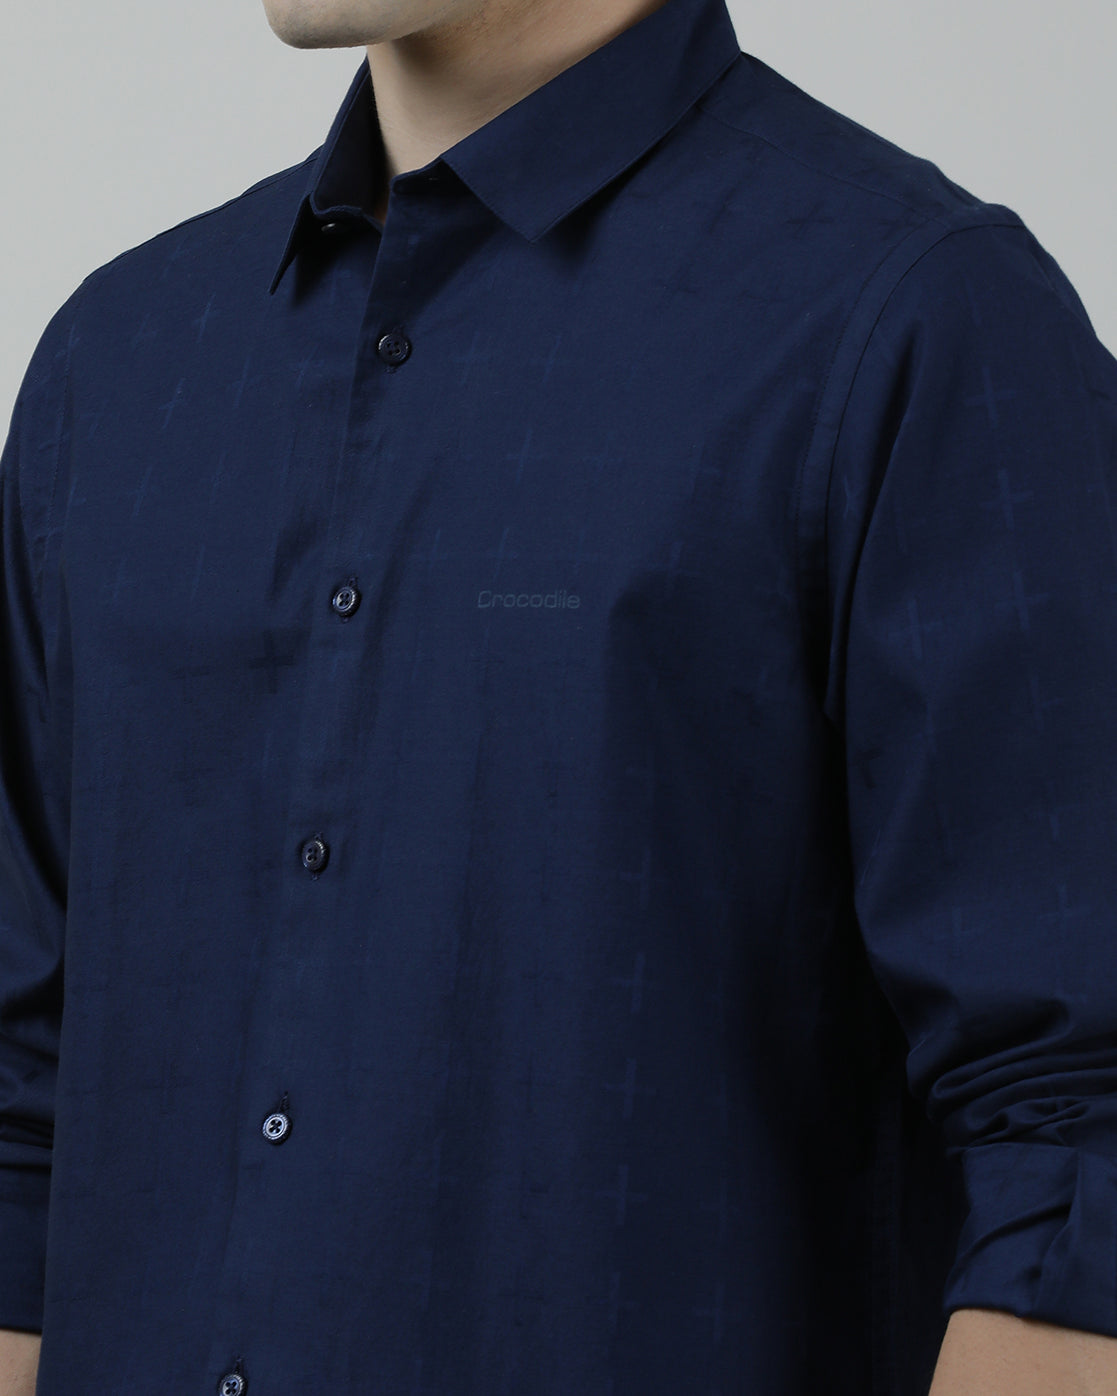 Casual Navy Full Sleeve Comfort Fit Solid Shirt with Collar for Men